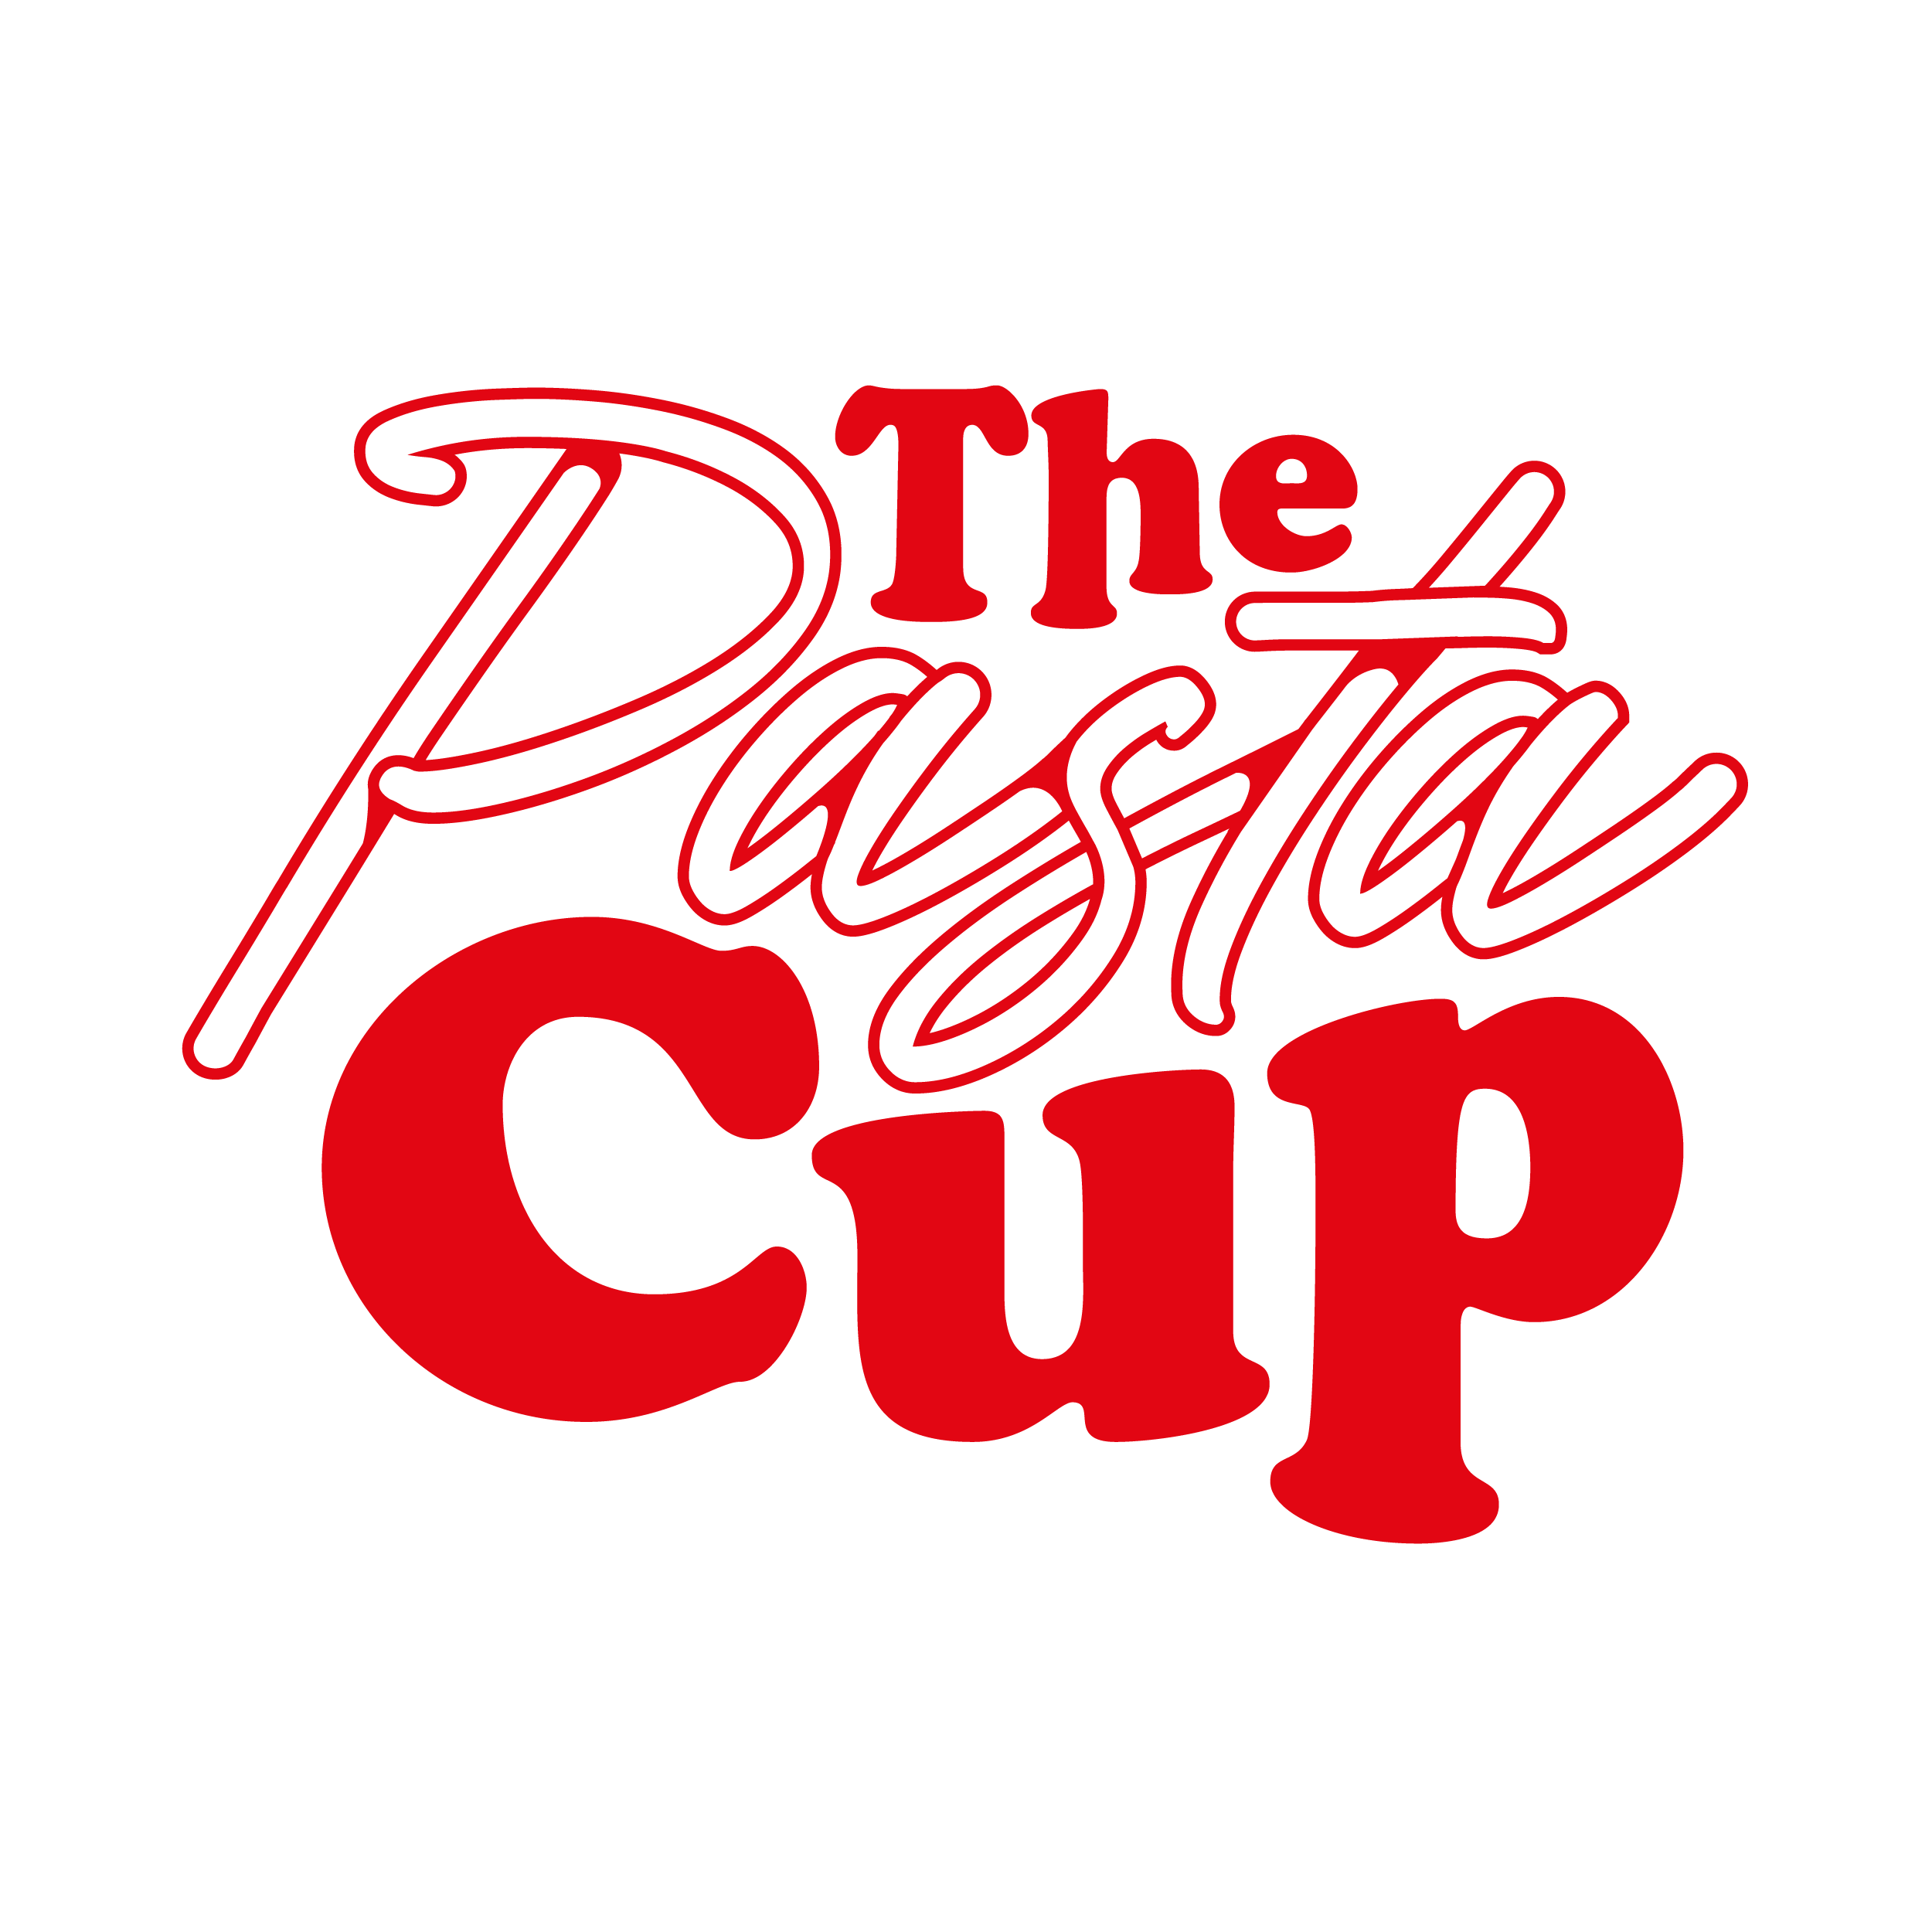 The Pasta Cup